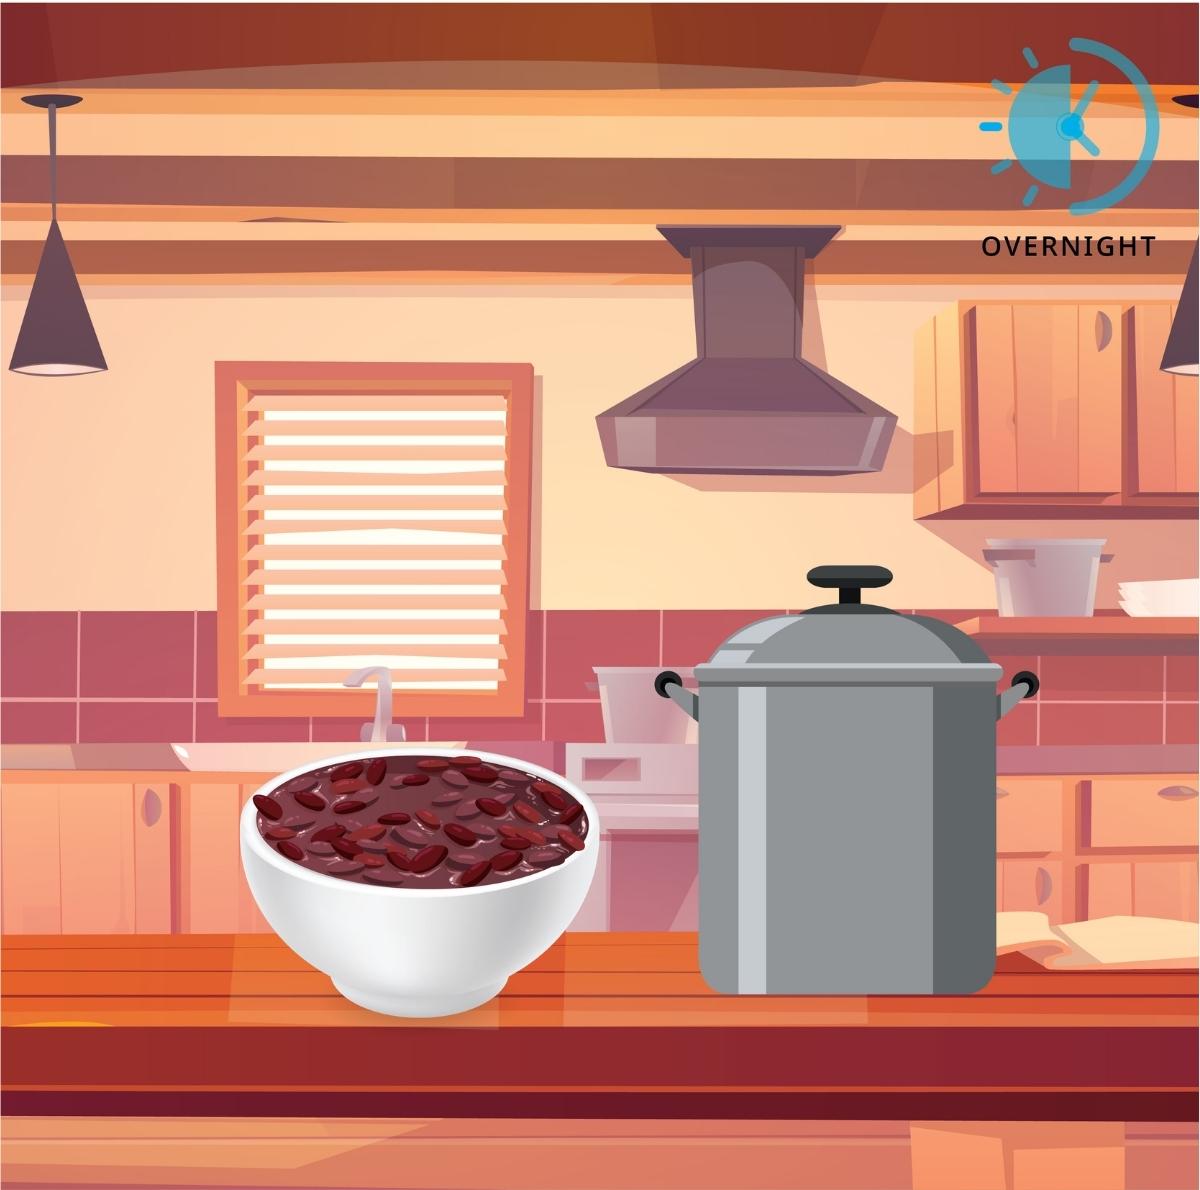 If you want to soak your beans overnight for softness, you can do that using your pressure cooker.